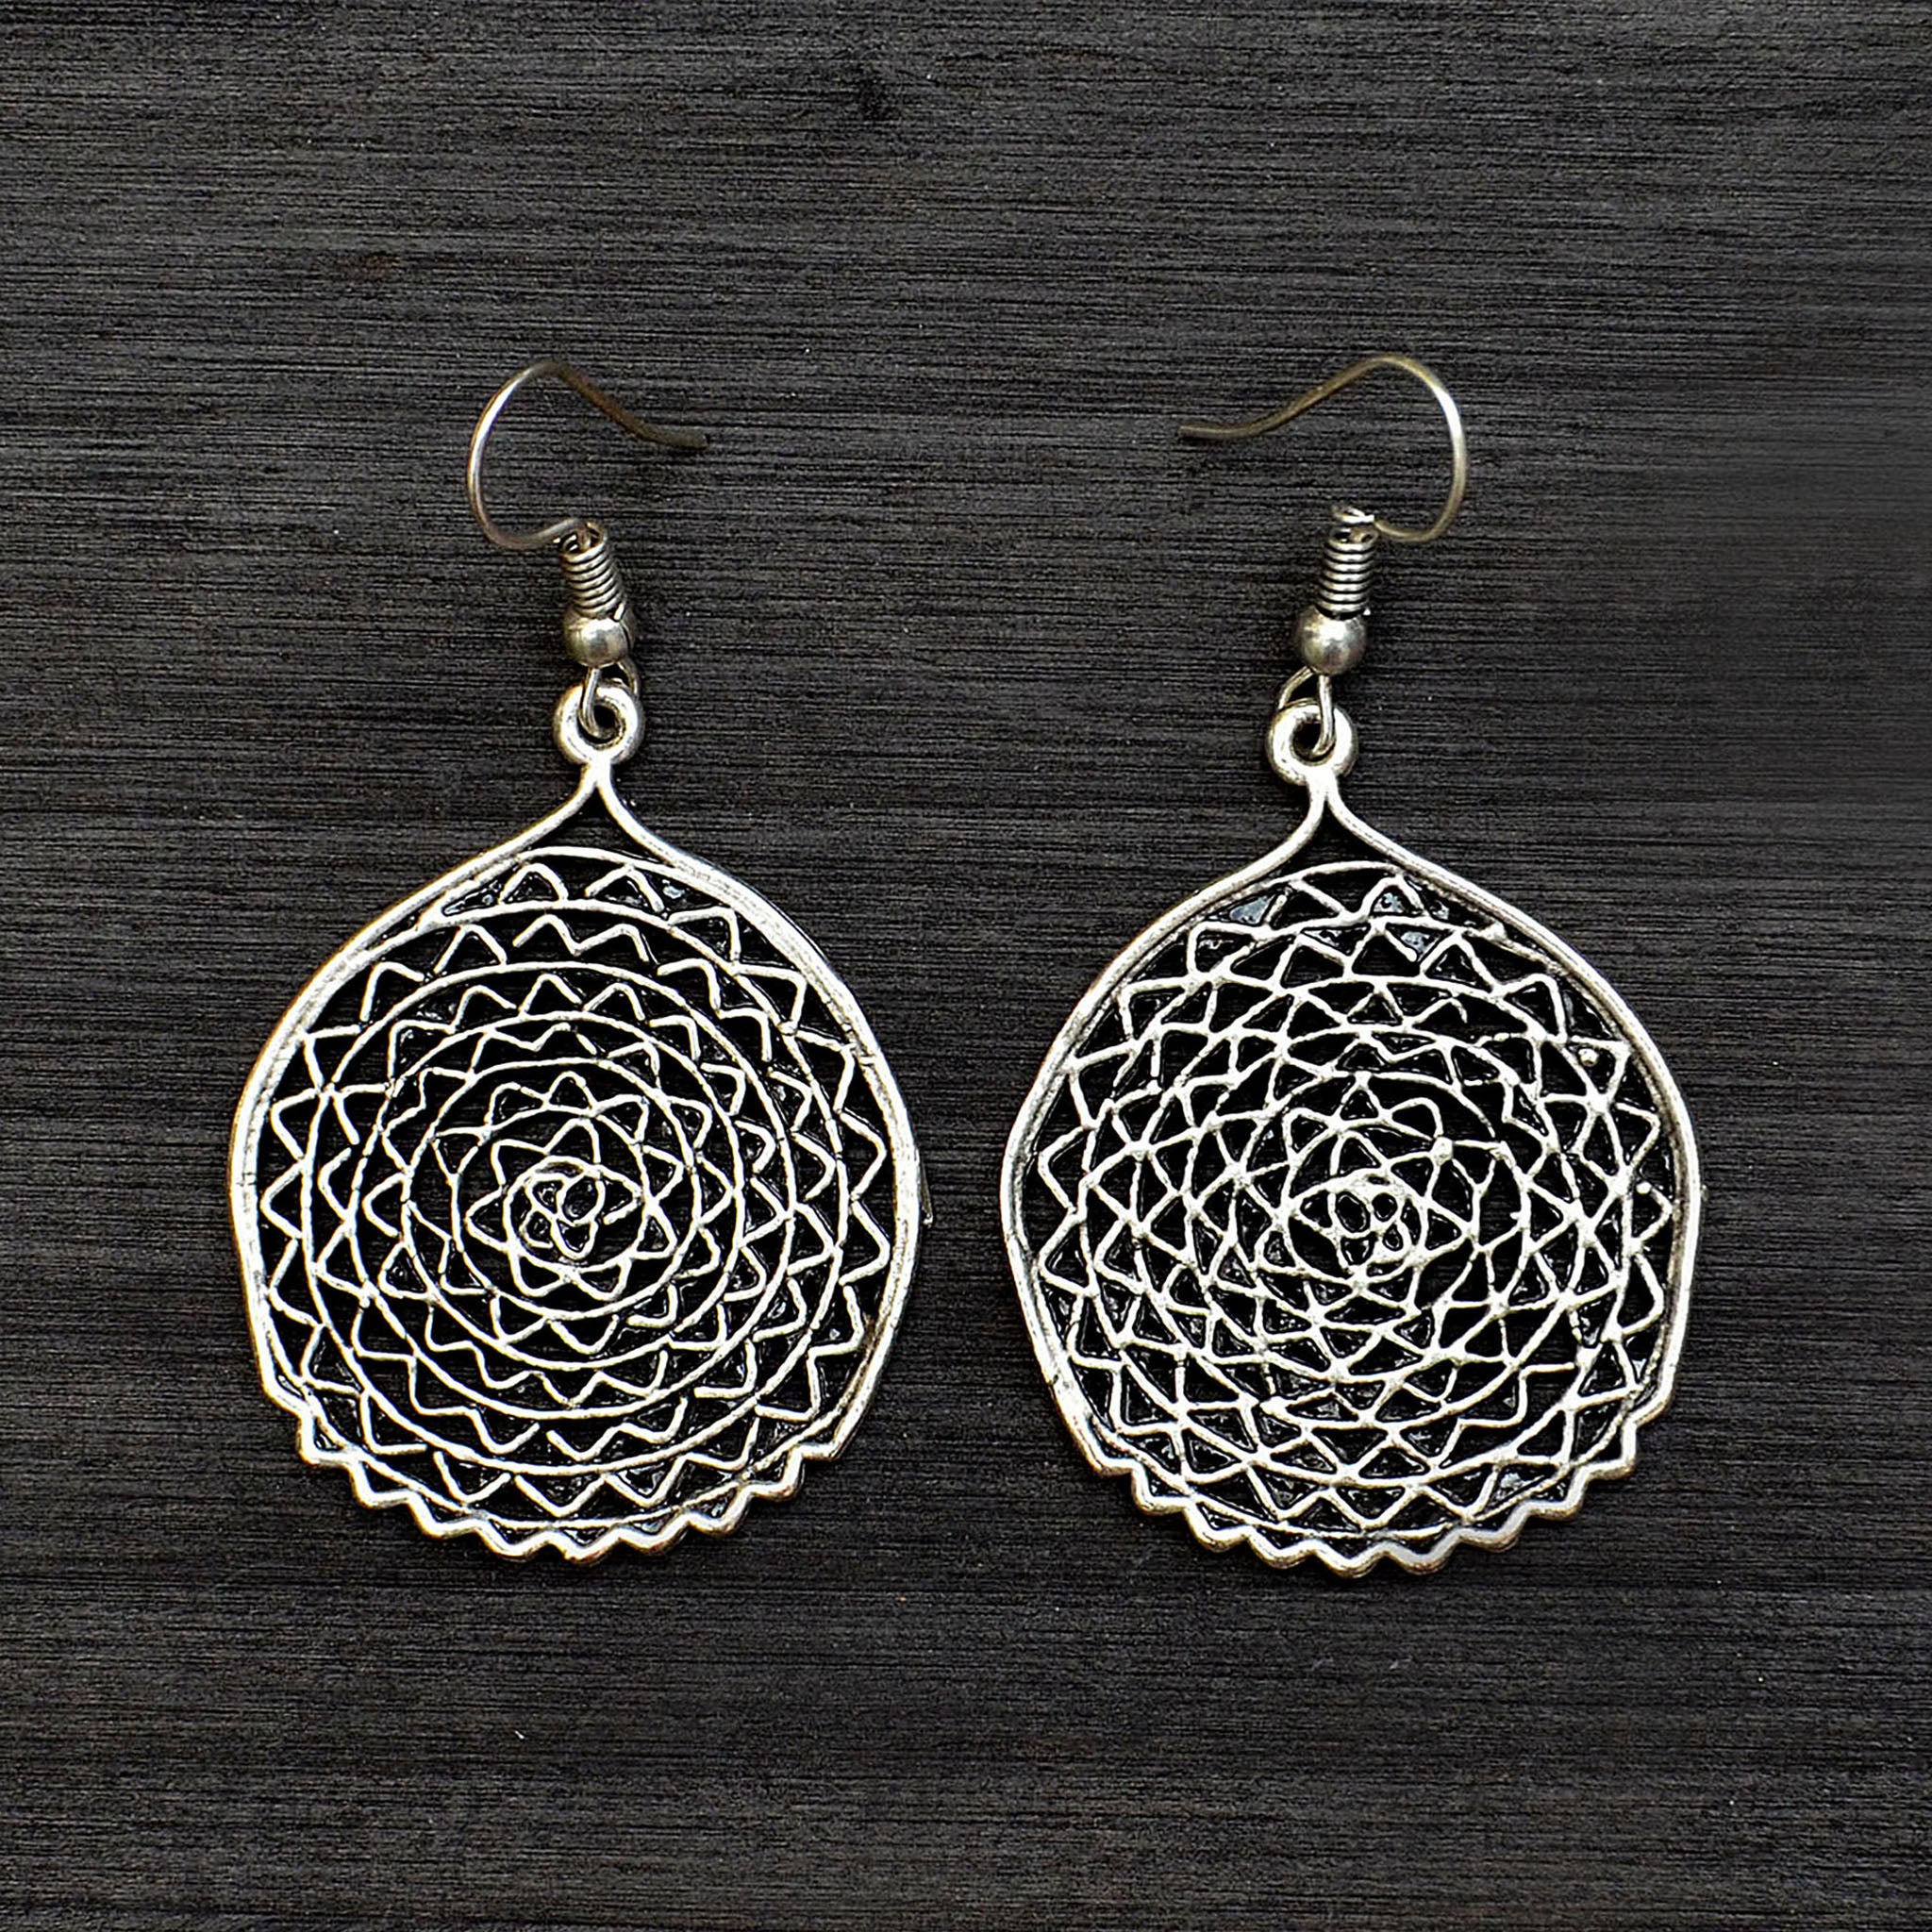 Silver filigree disc hanging earrings on gray background